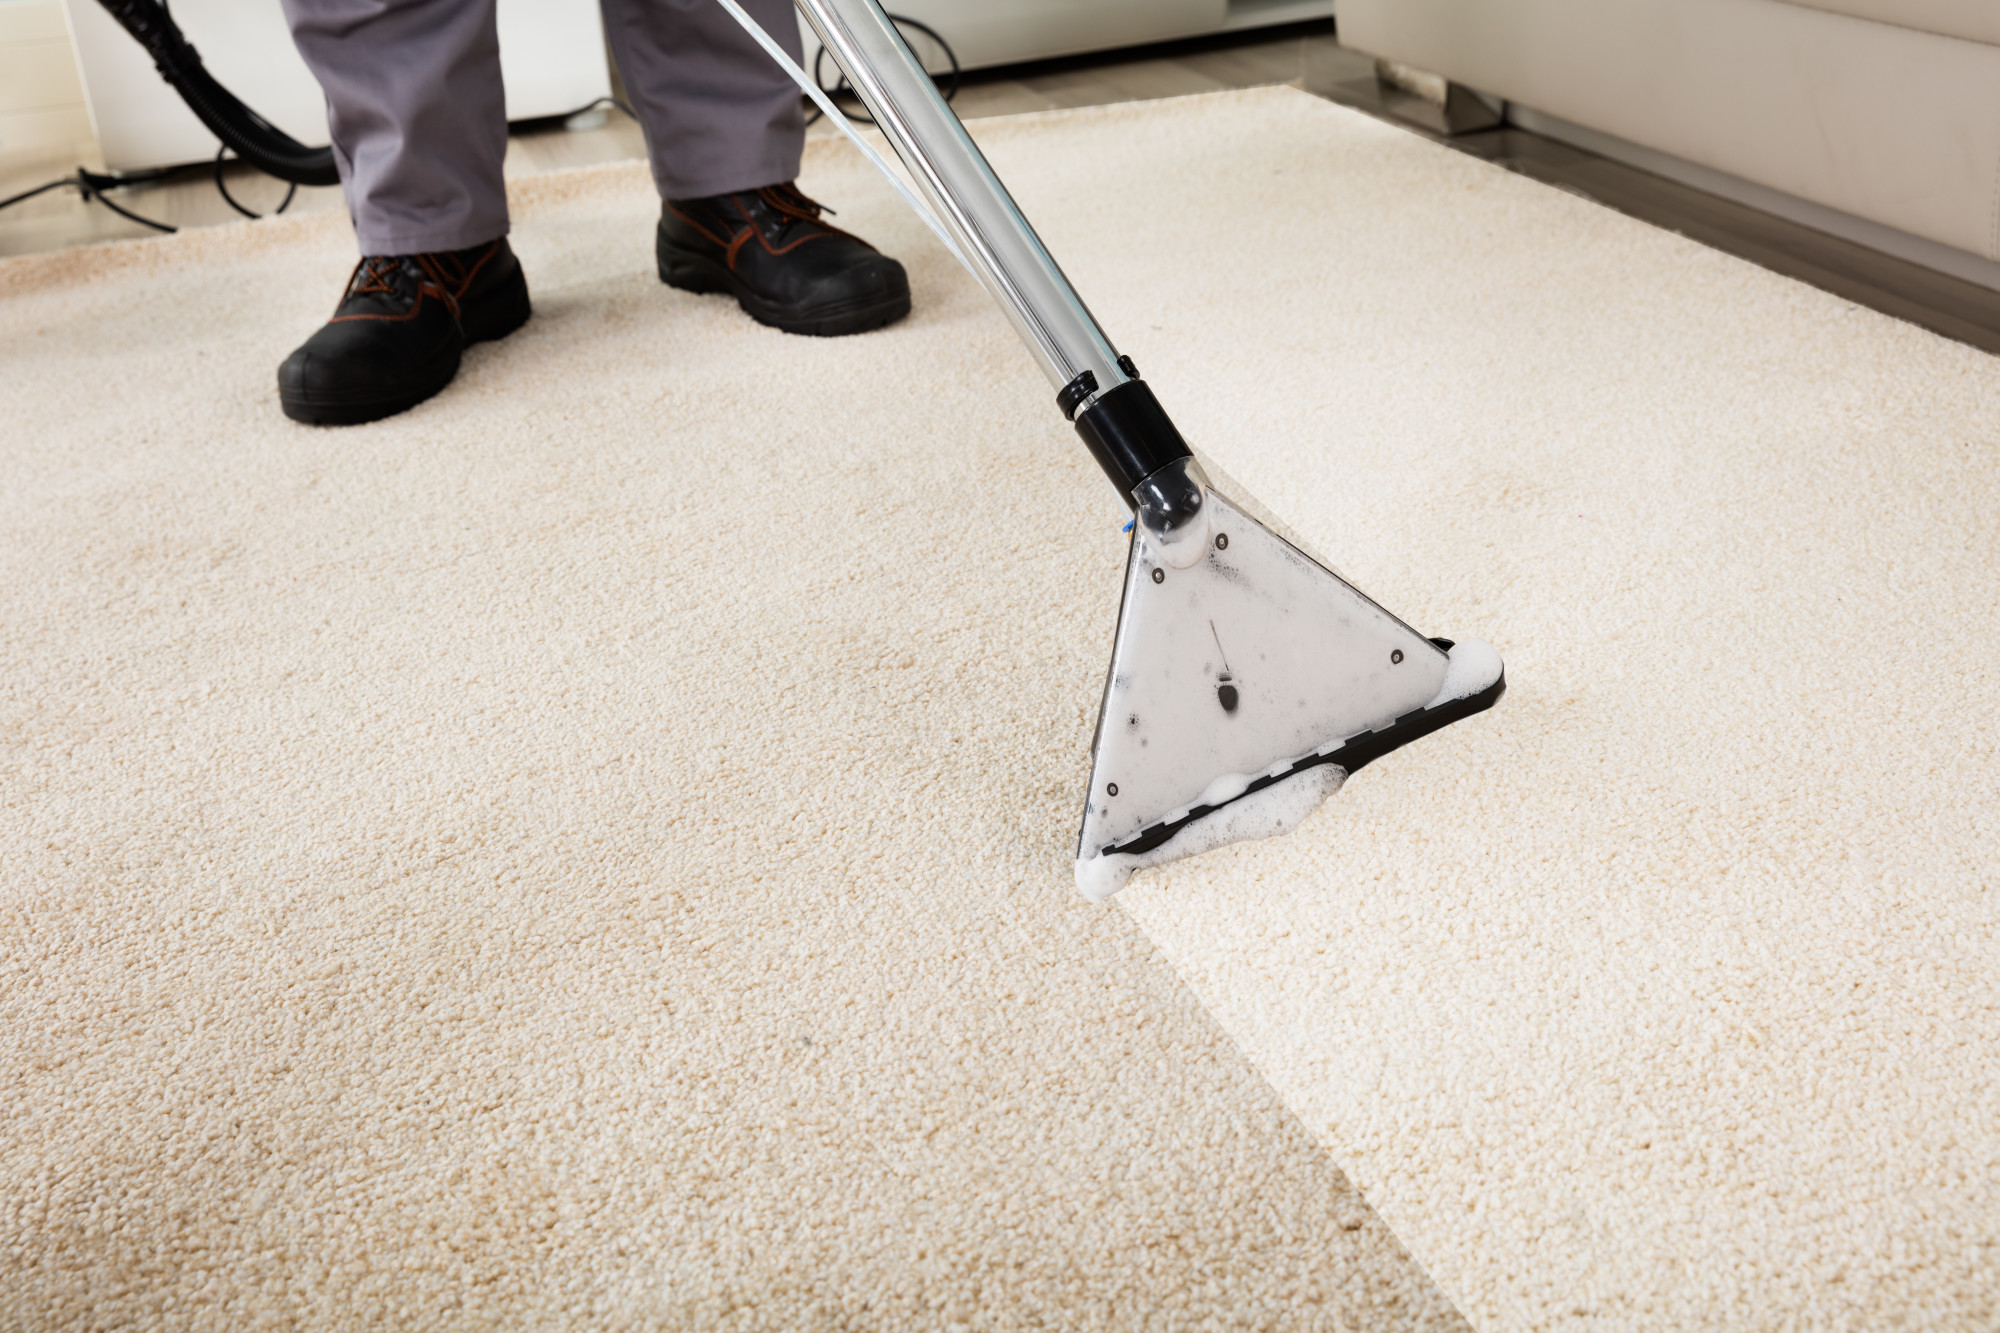 When it comes to cleaning your carpet, the smallest of mistakes can end up ruining it. Here's a quick look at five common carpet cleaning mistakes.